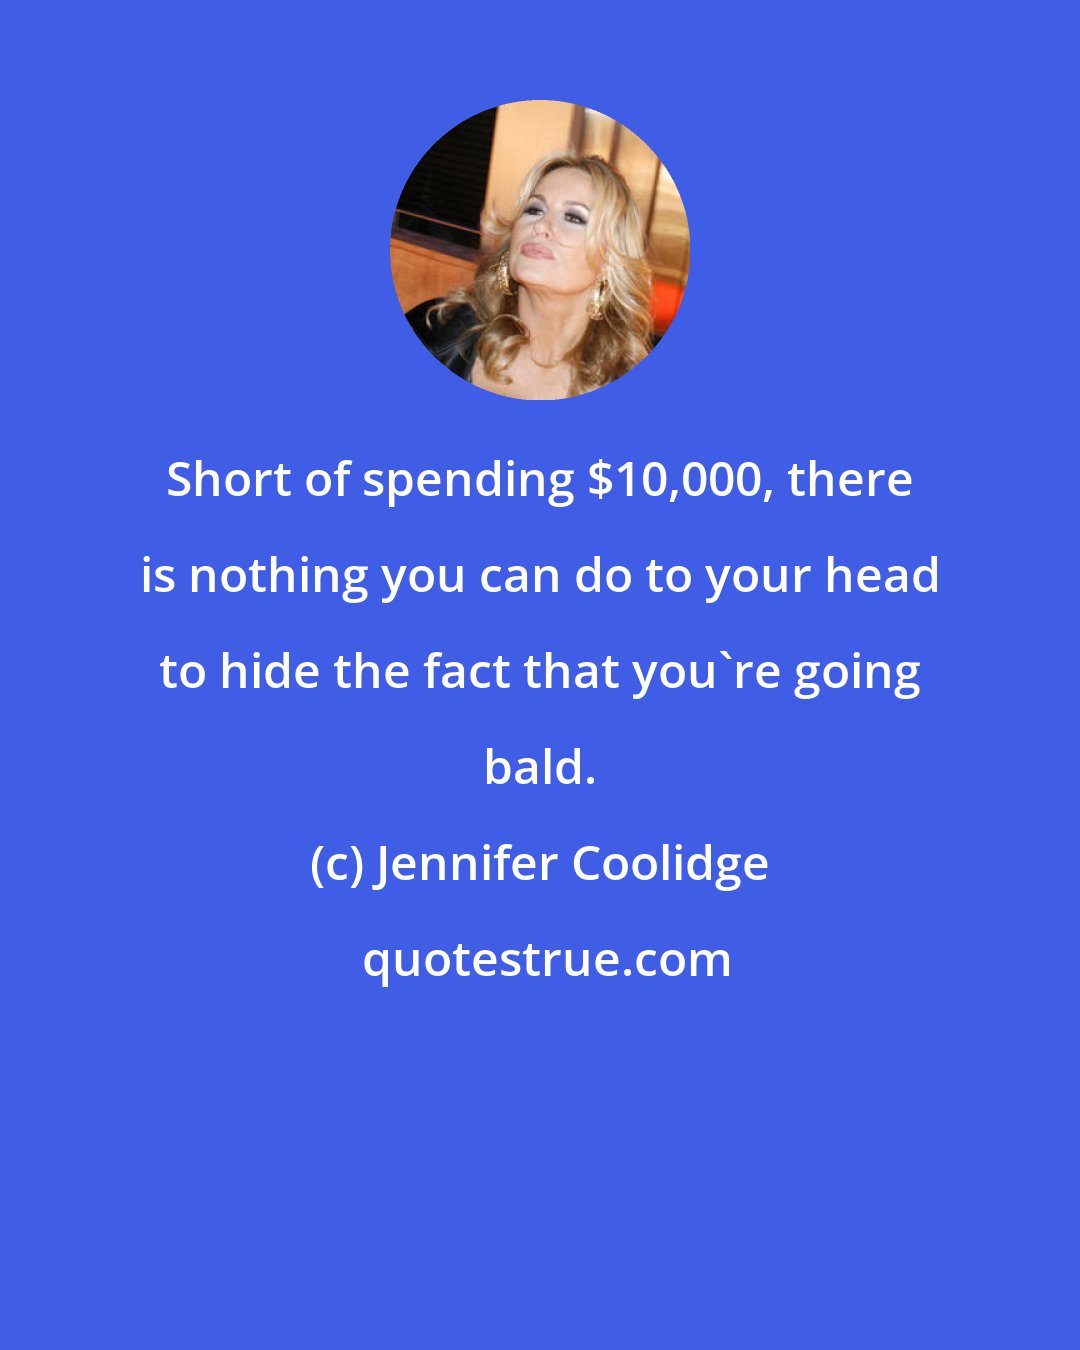 Jennifer Coolidge: Short of spending $10,000, there is nothing you can do to your head to hide the fact that you're going bald.